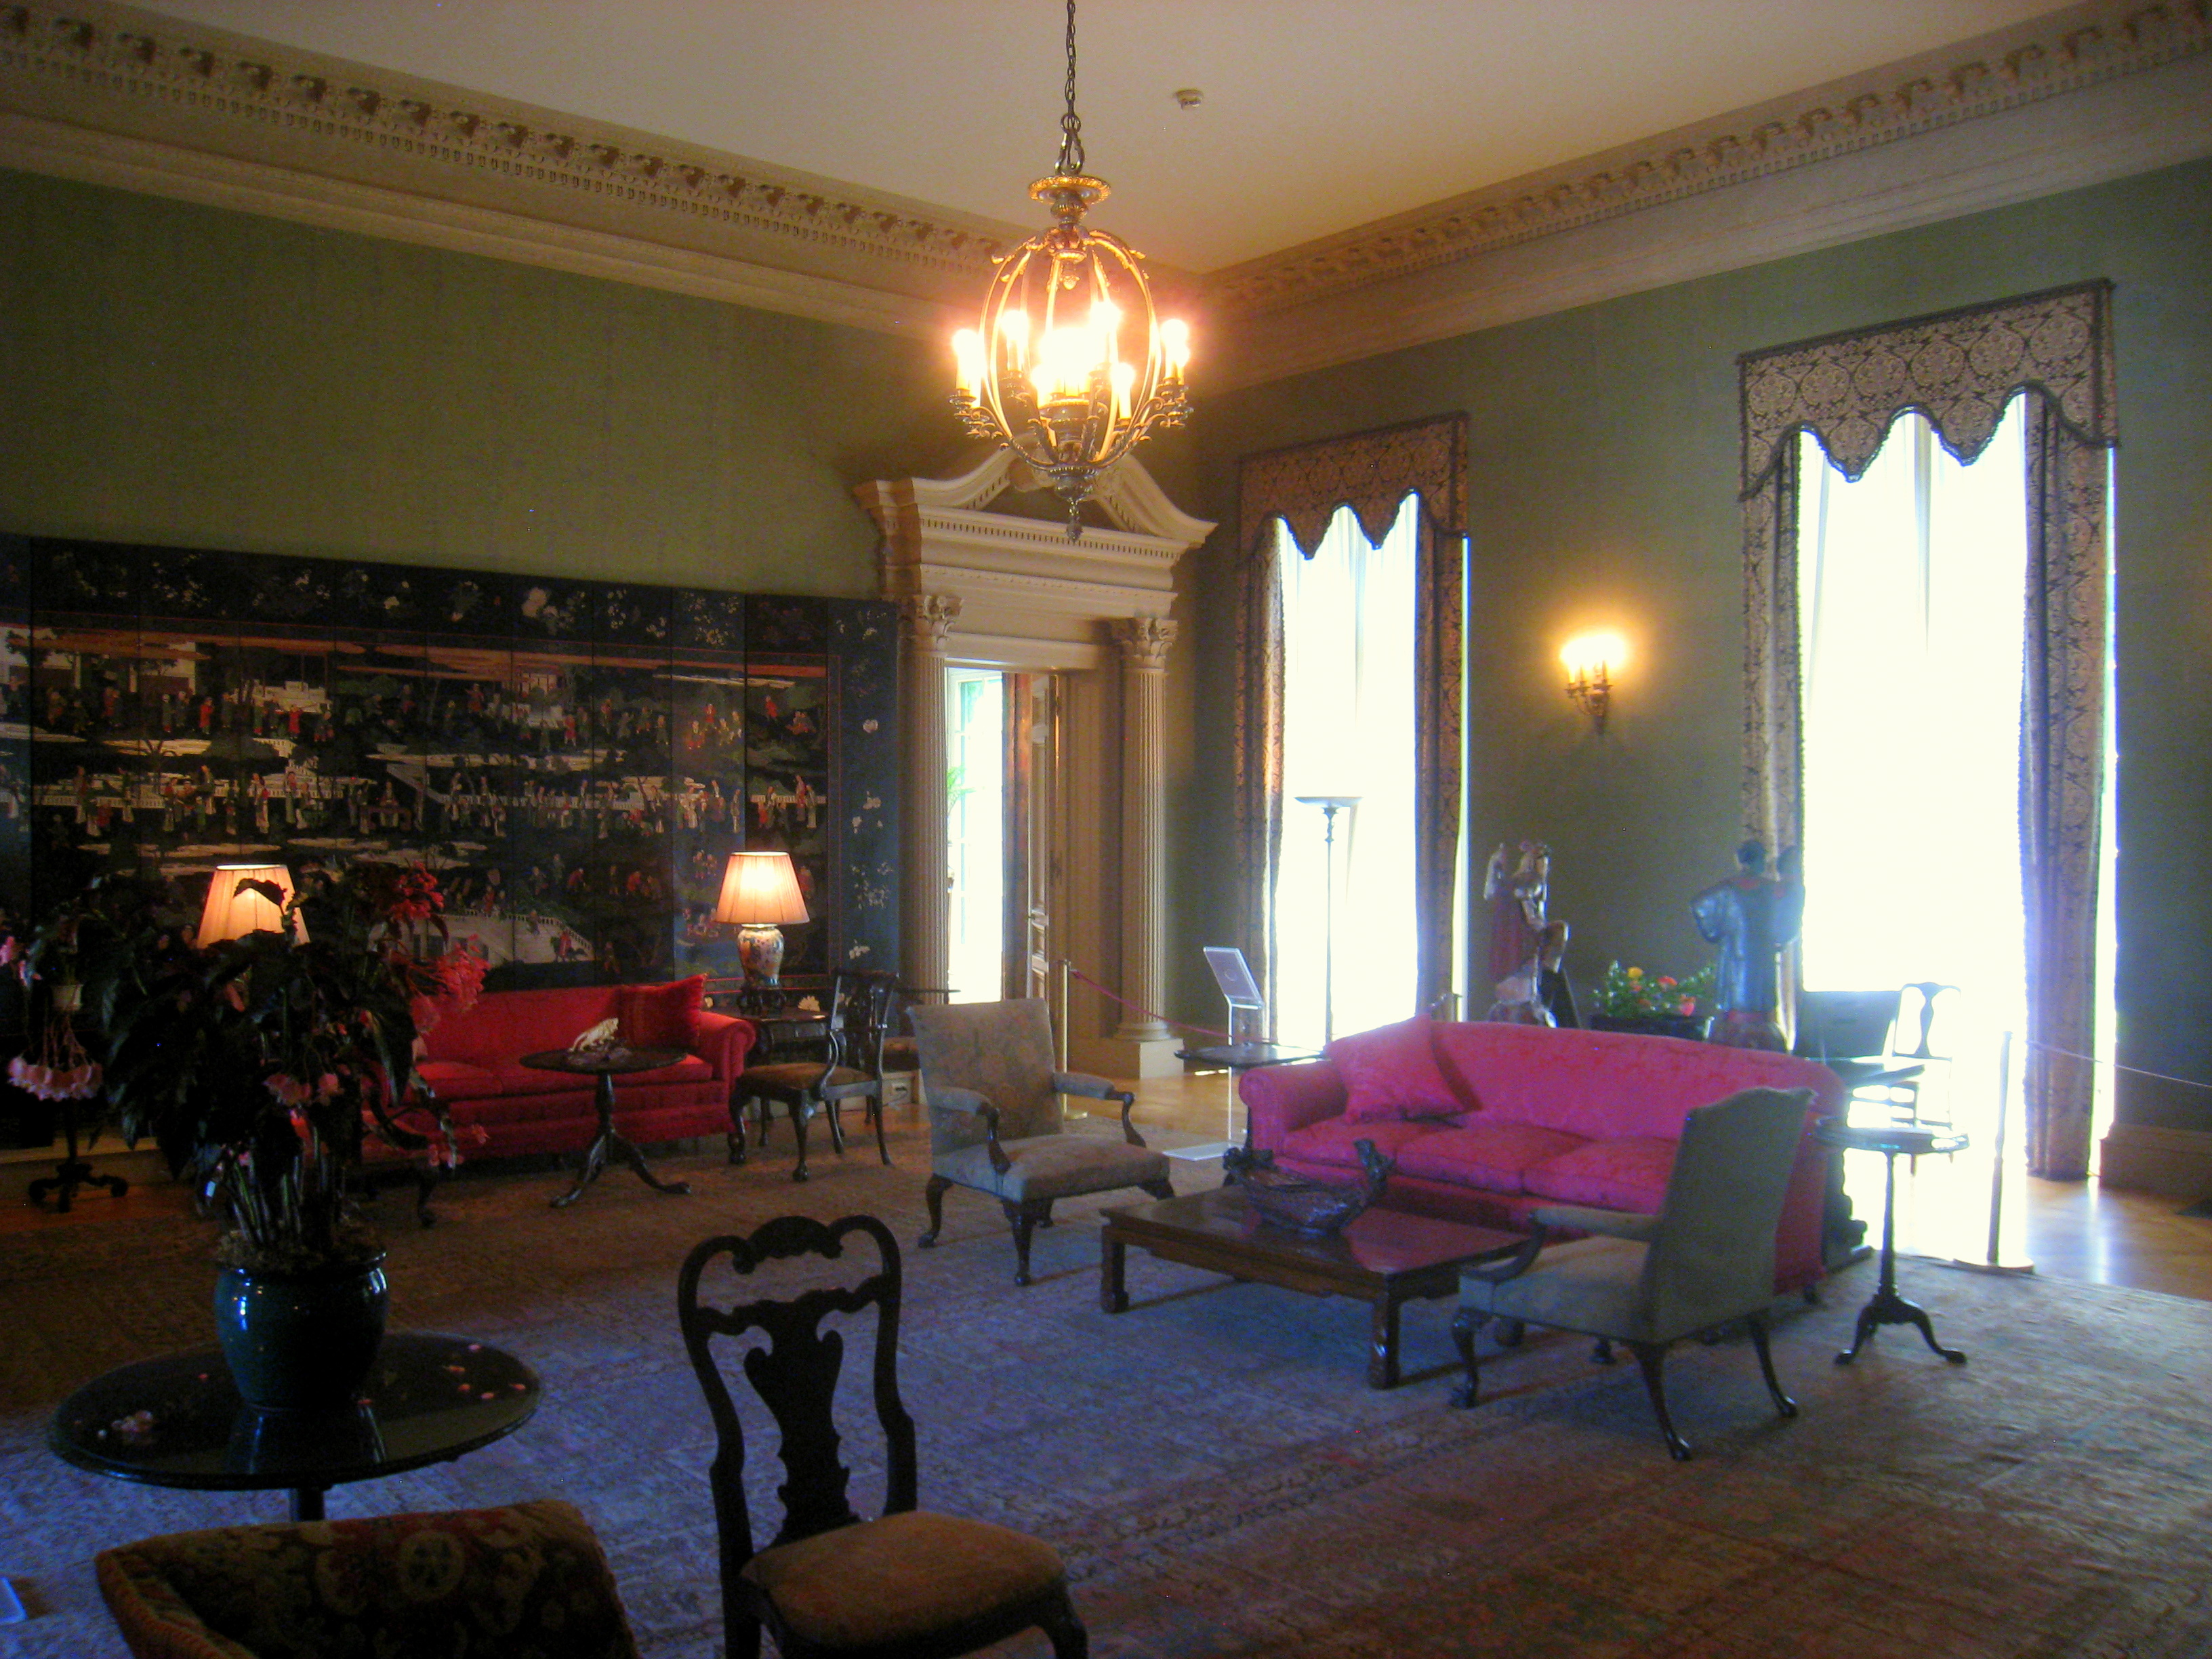 A lowly lit Victorian era room with green wall paper, couches and chairs.